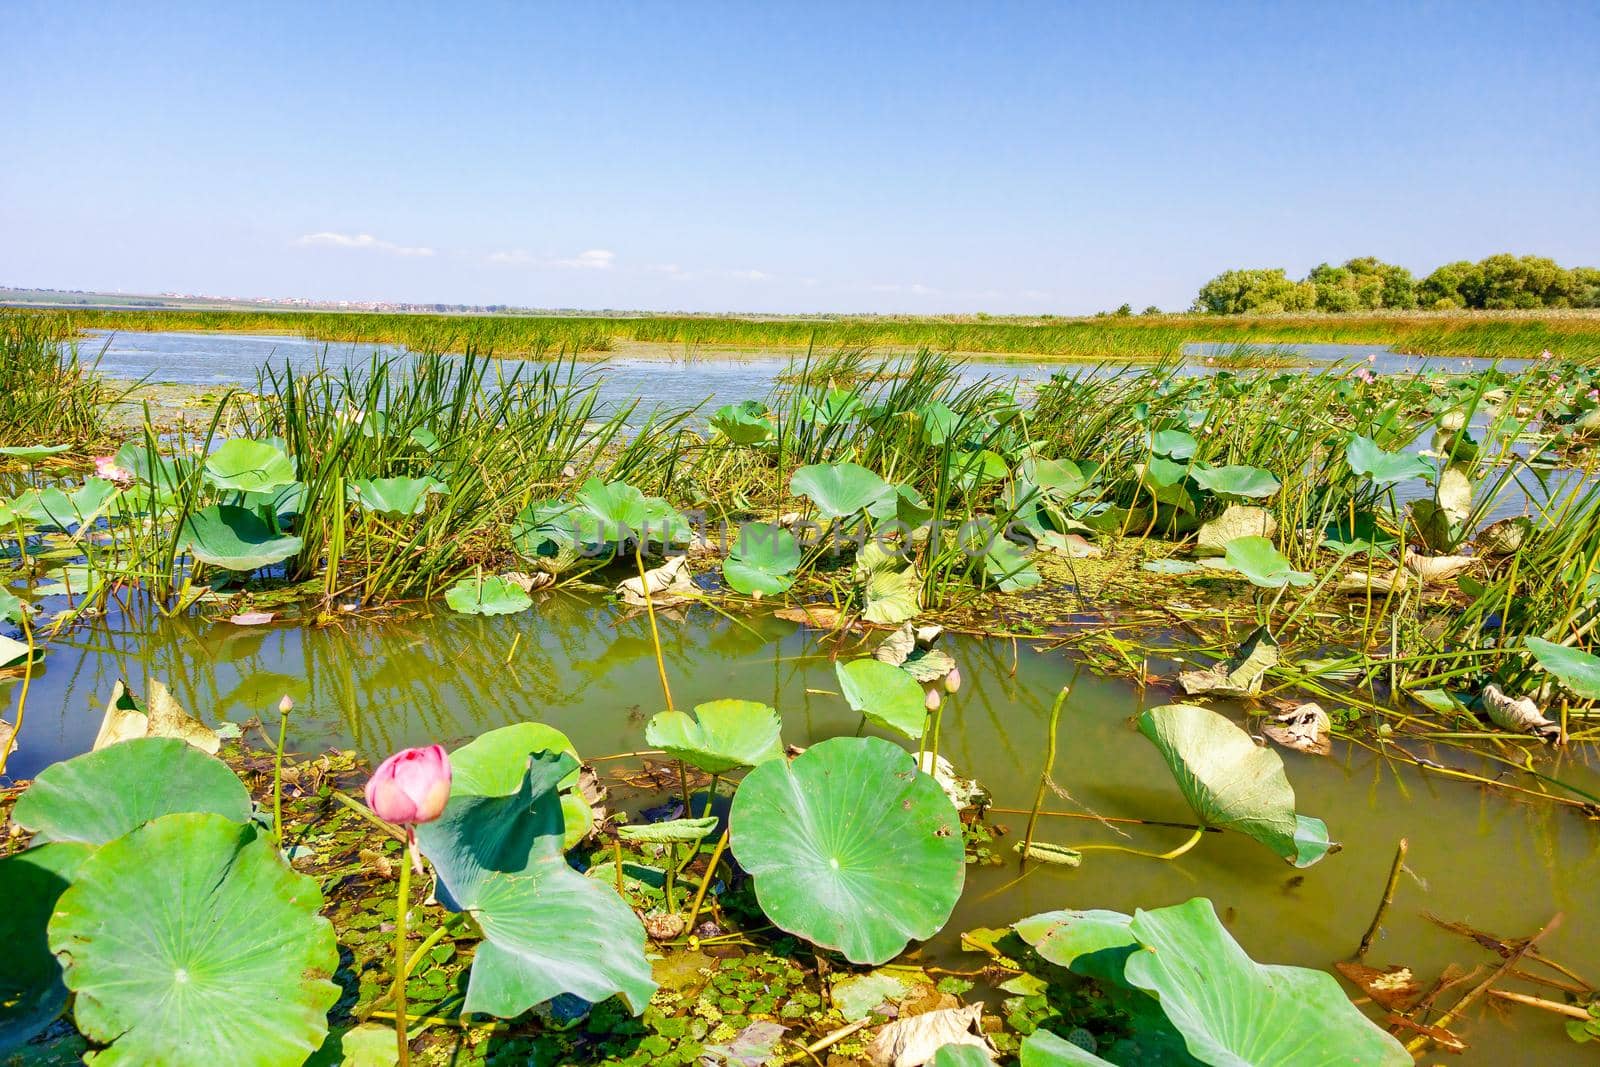 Flowers and lotus leaves among a large lake in the Krasnodar region, Russia.